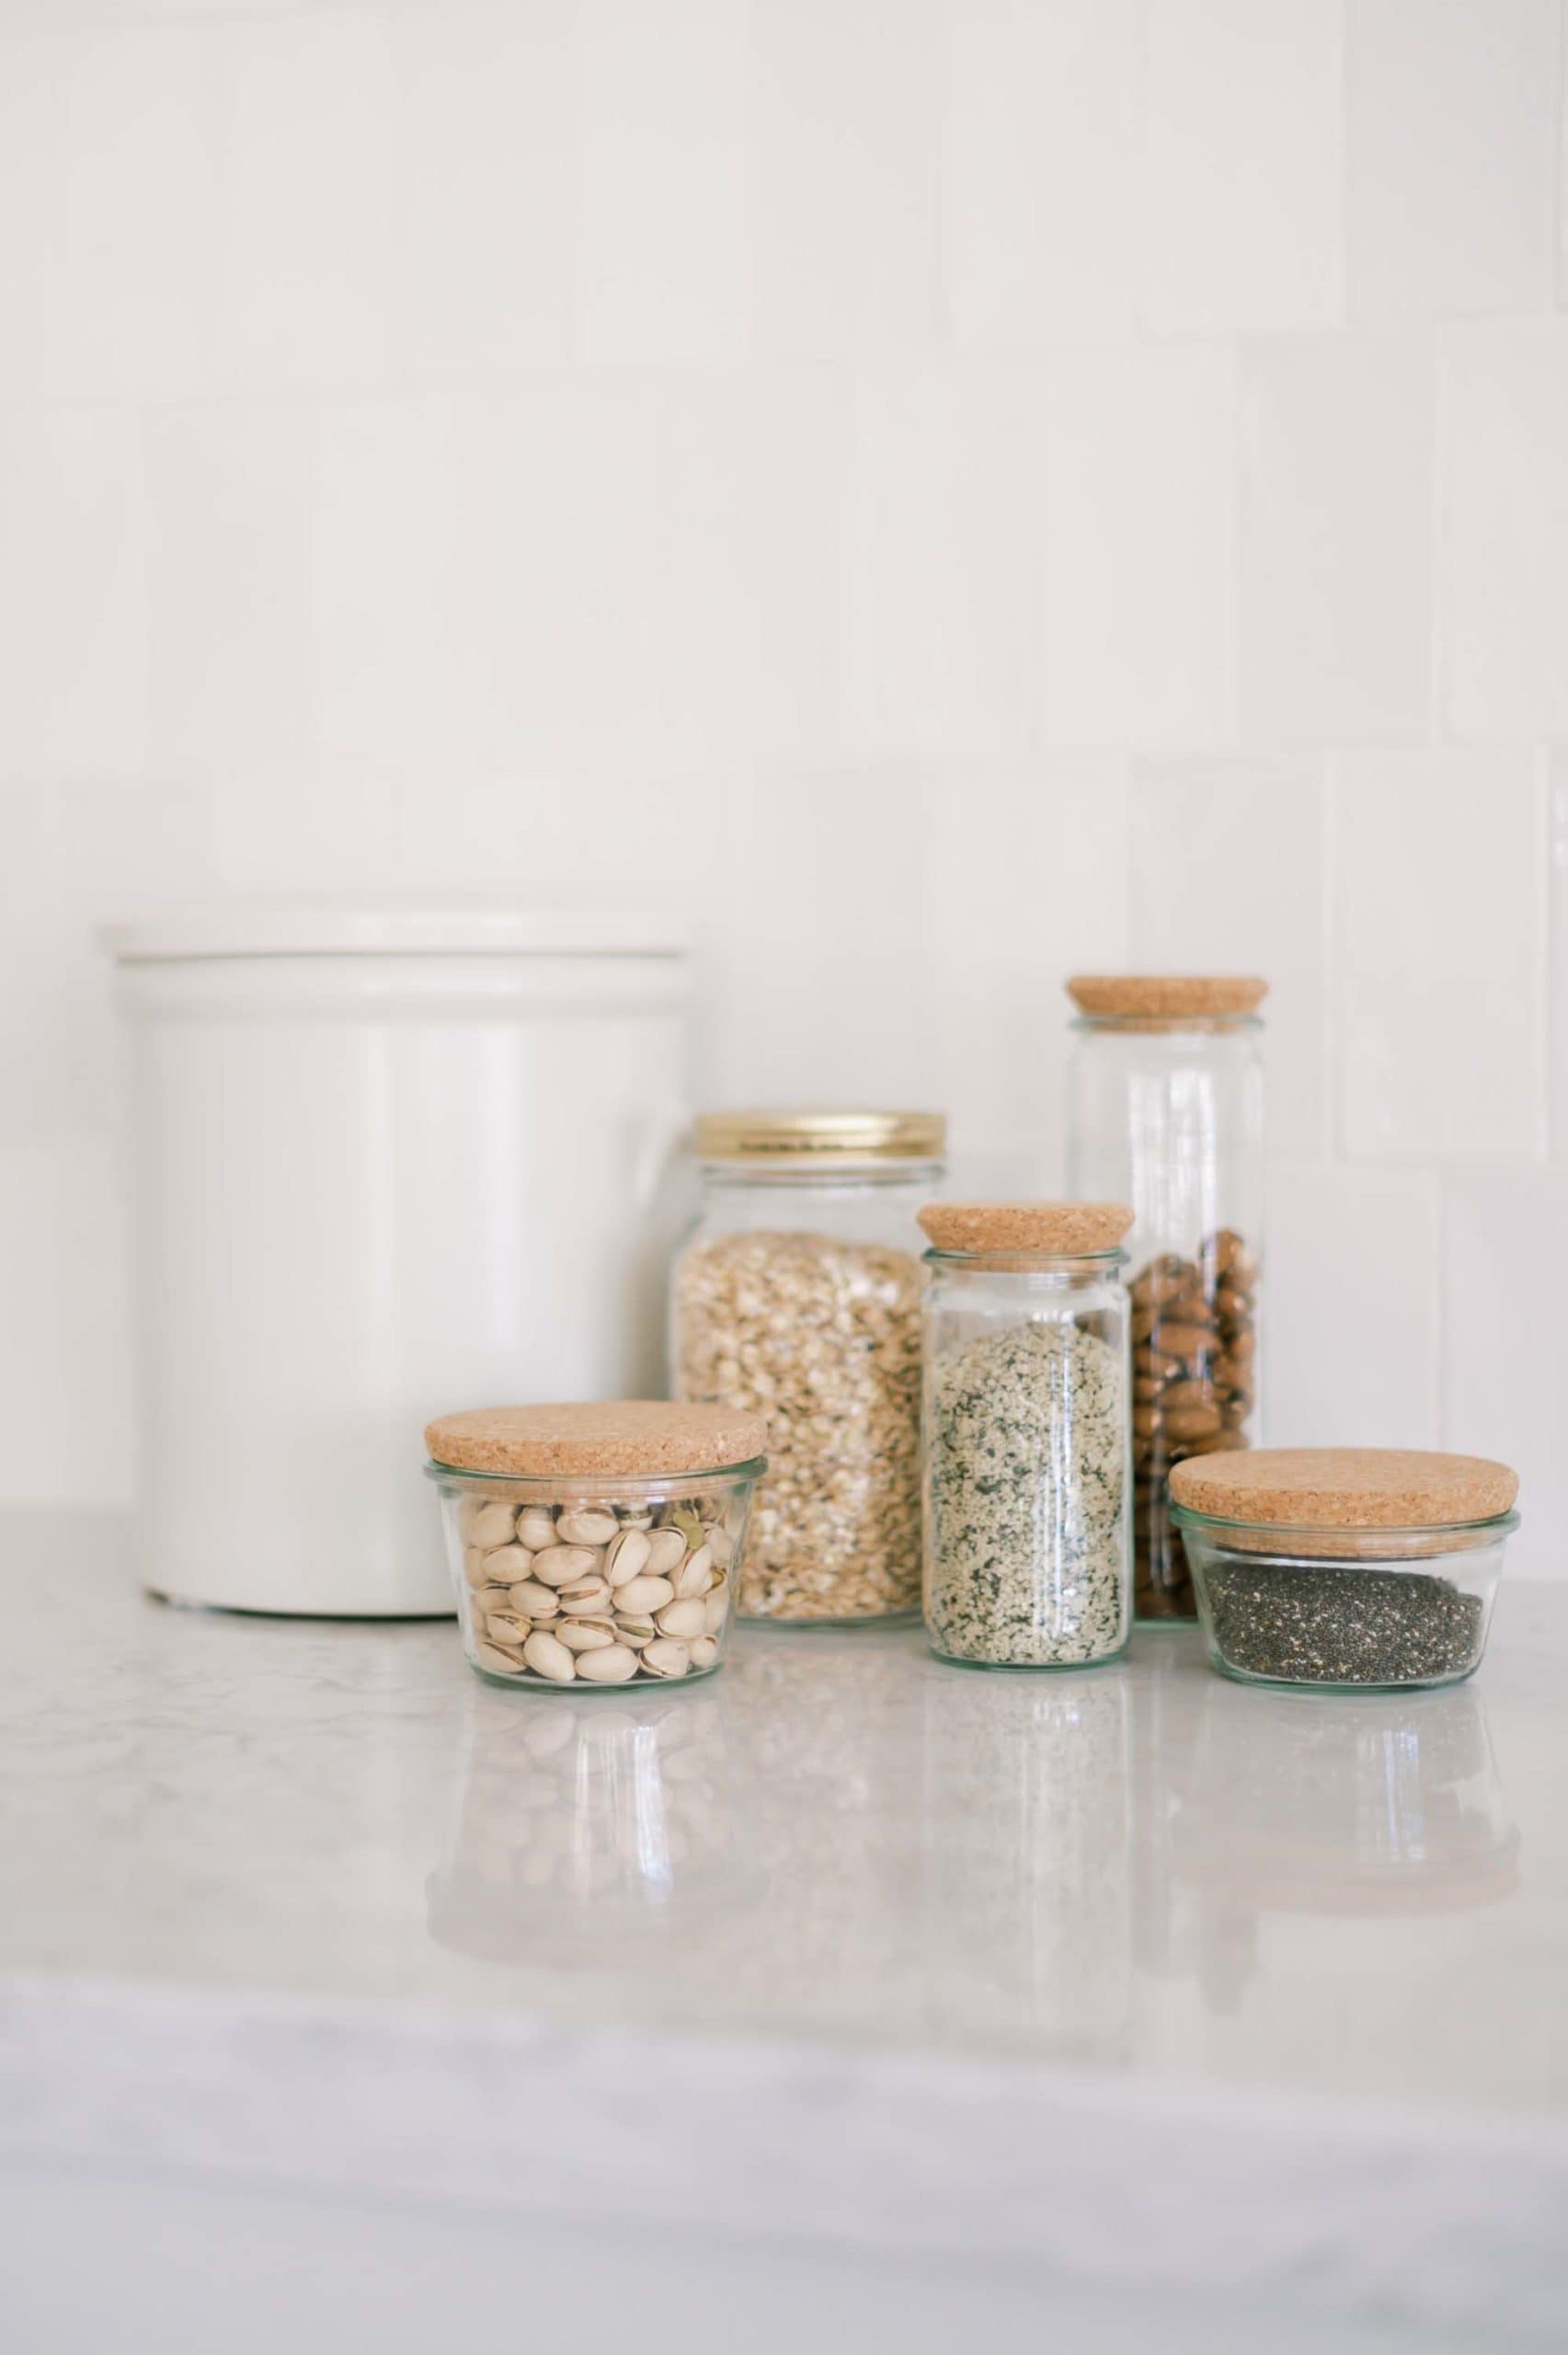 How to organize and store your dried goods